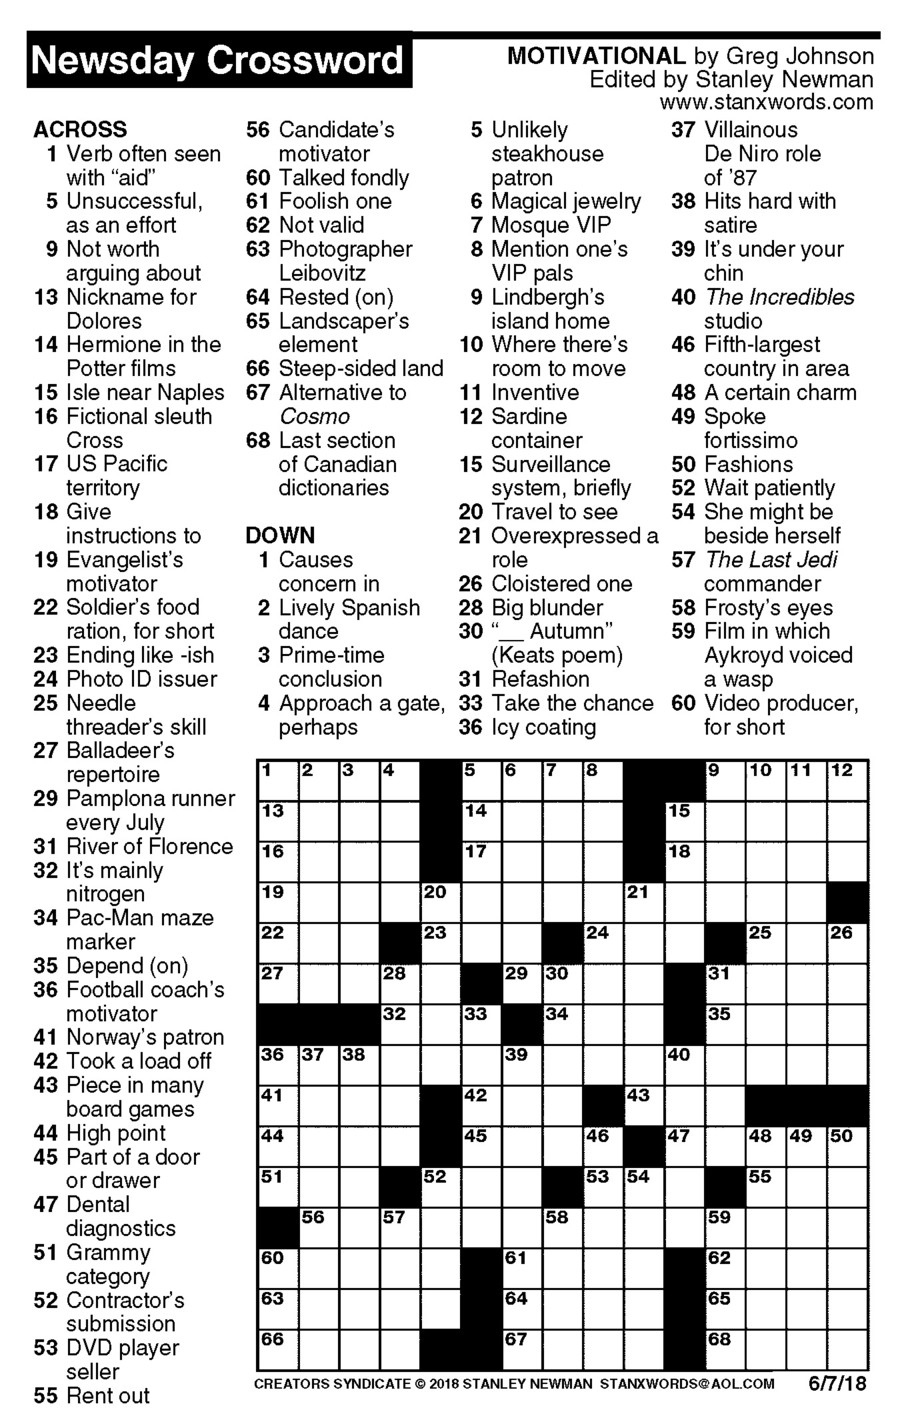 Newsday Crossword Puzzle For Oct 06 2018 stanley Newman Printable 